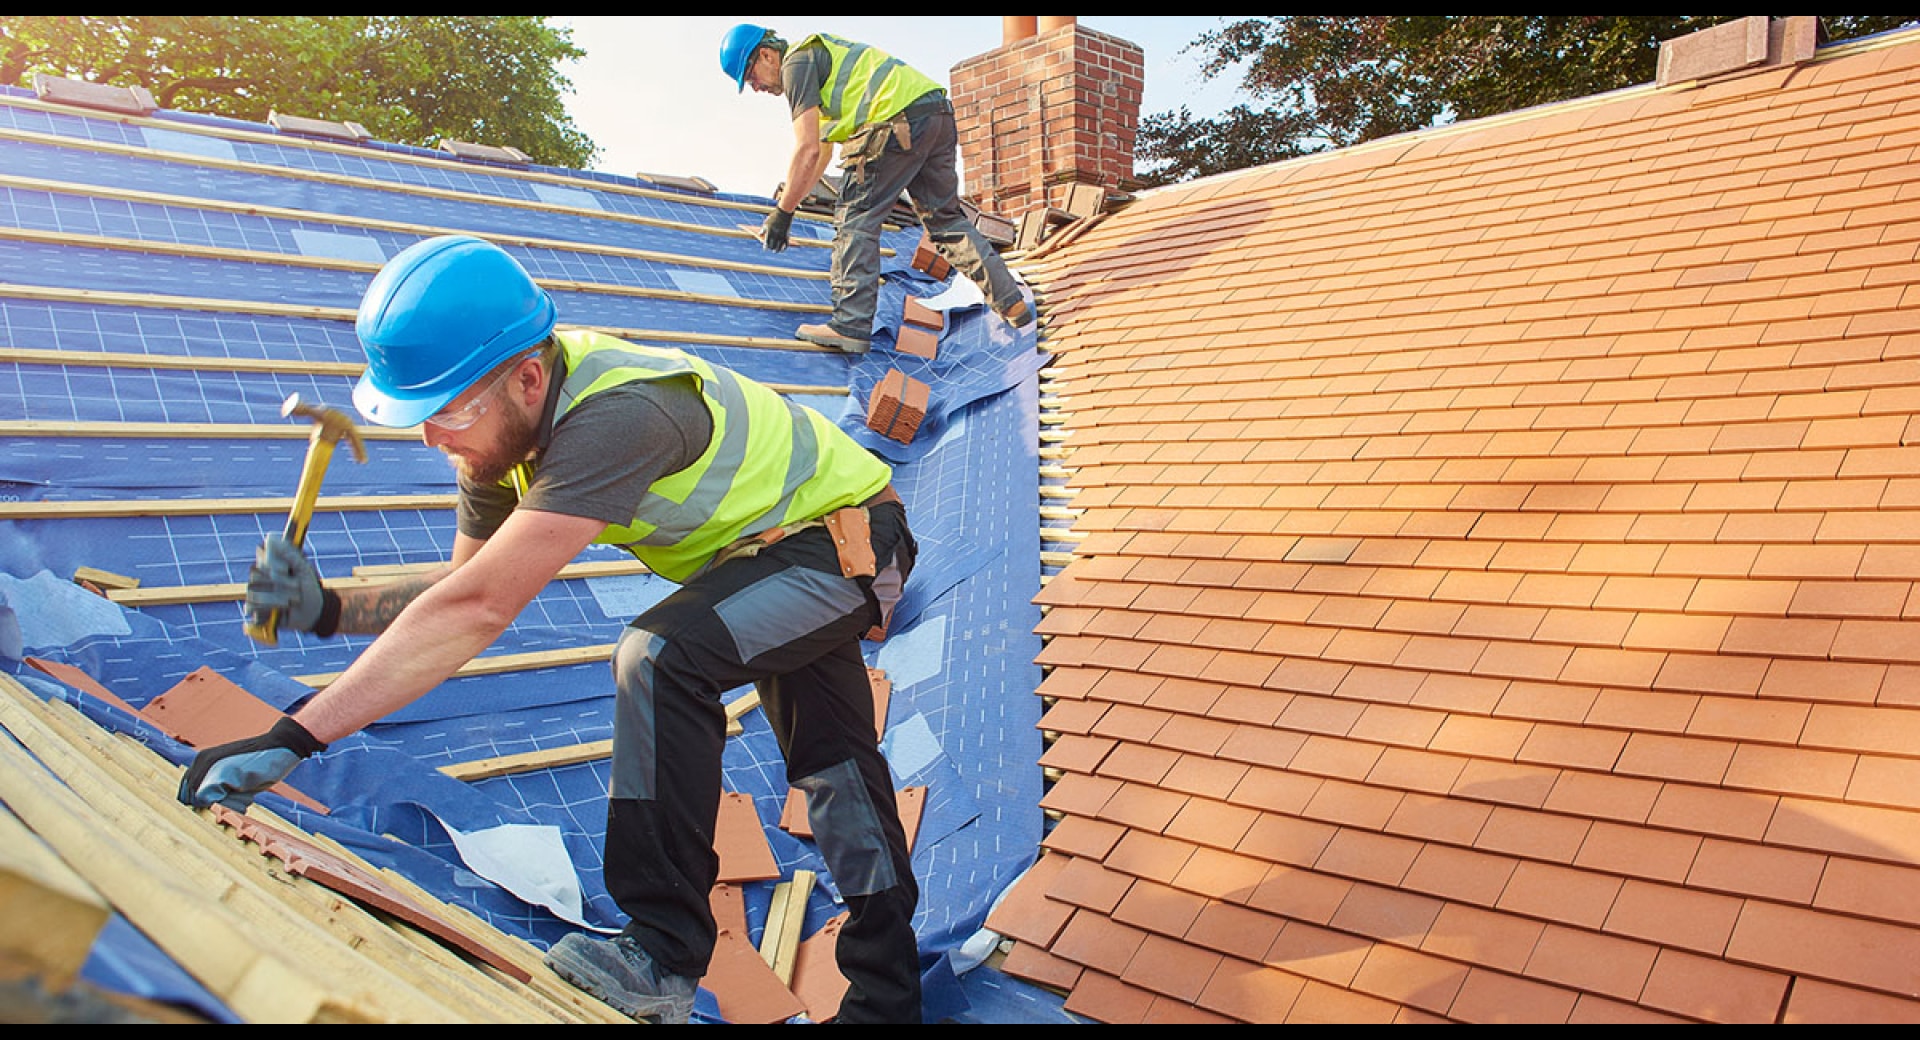 Insurance for Your Ontario Roofing Business